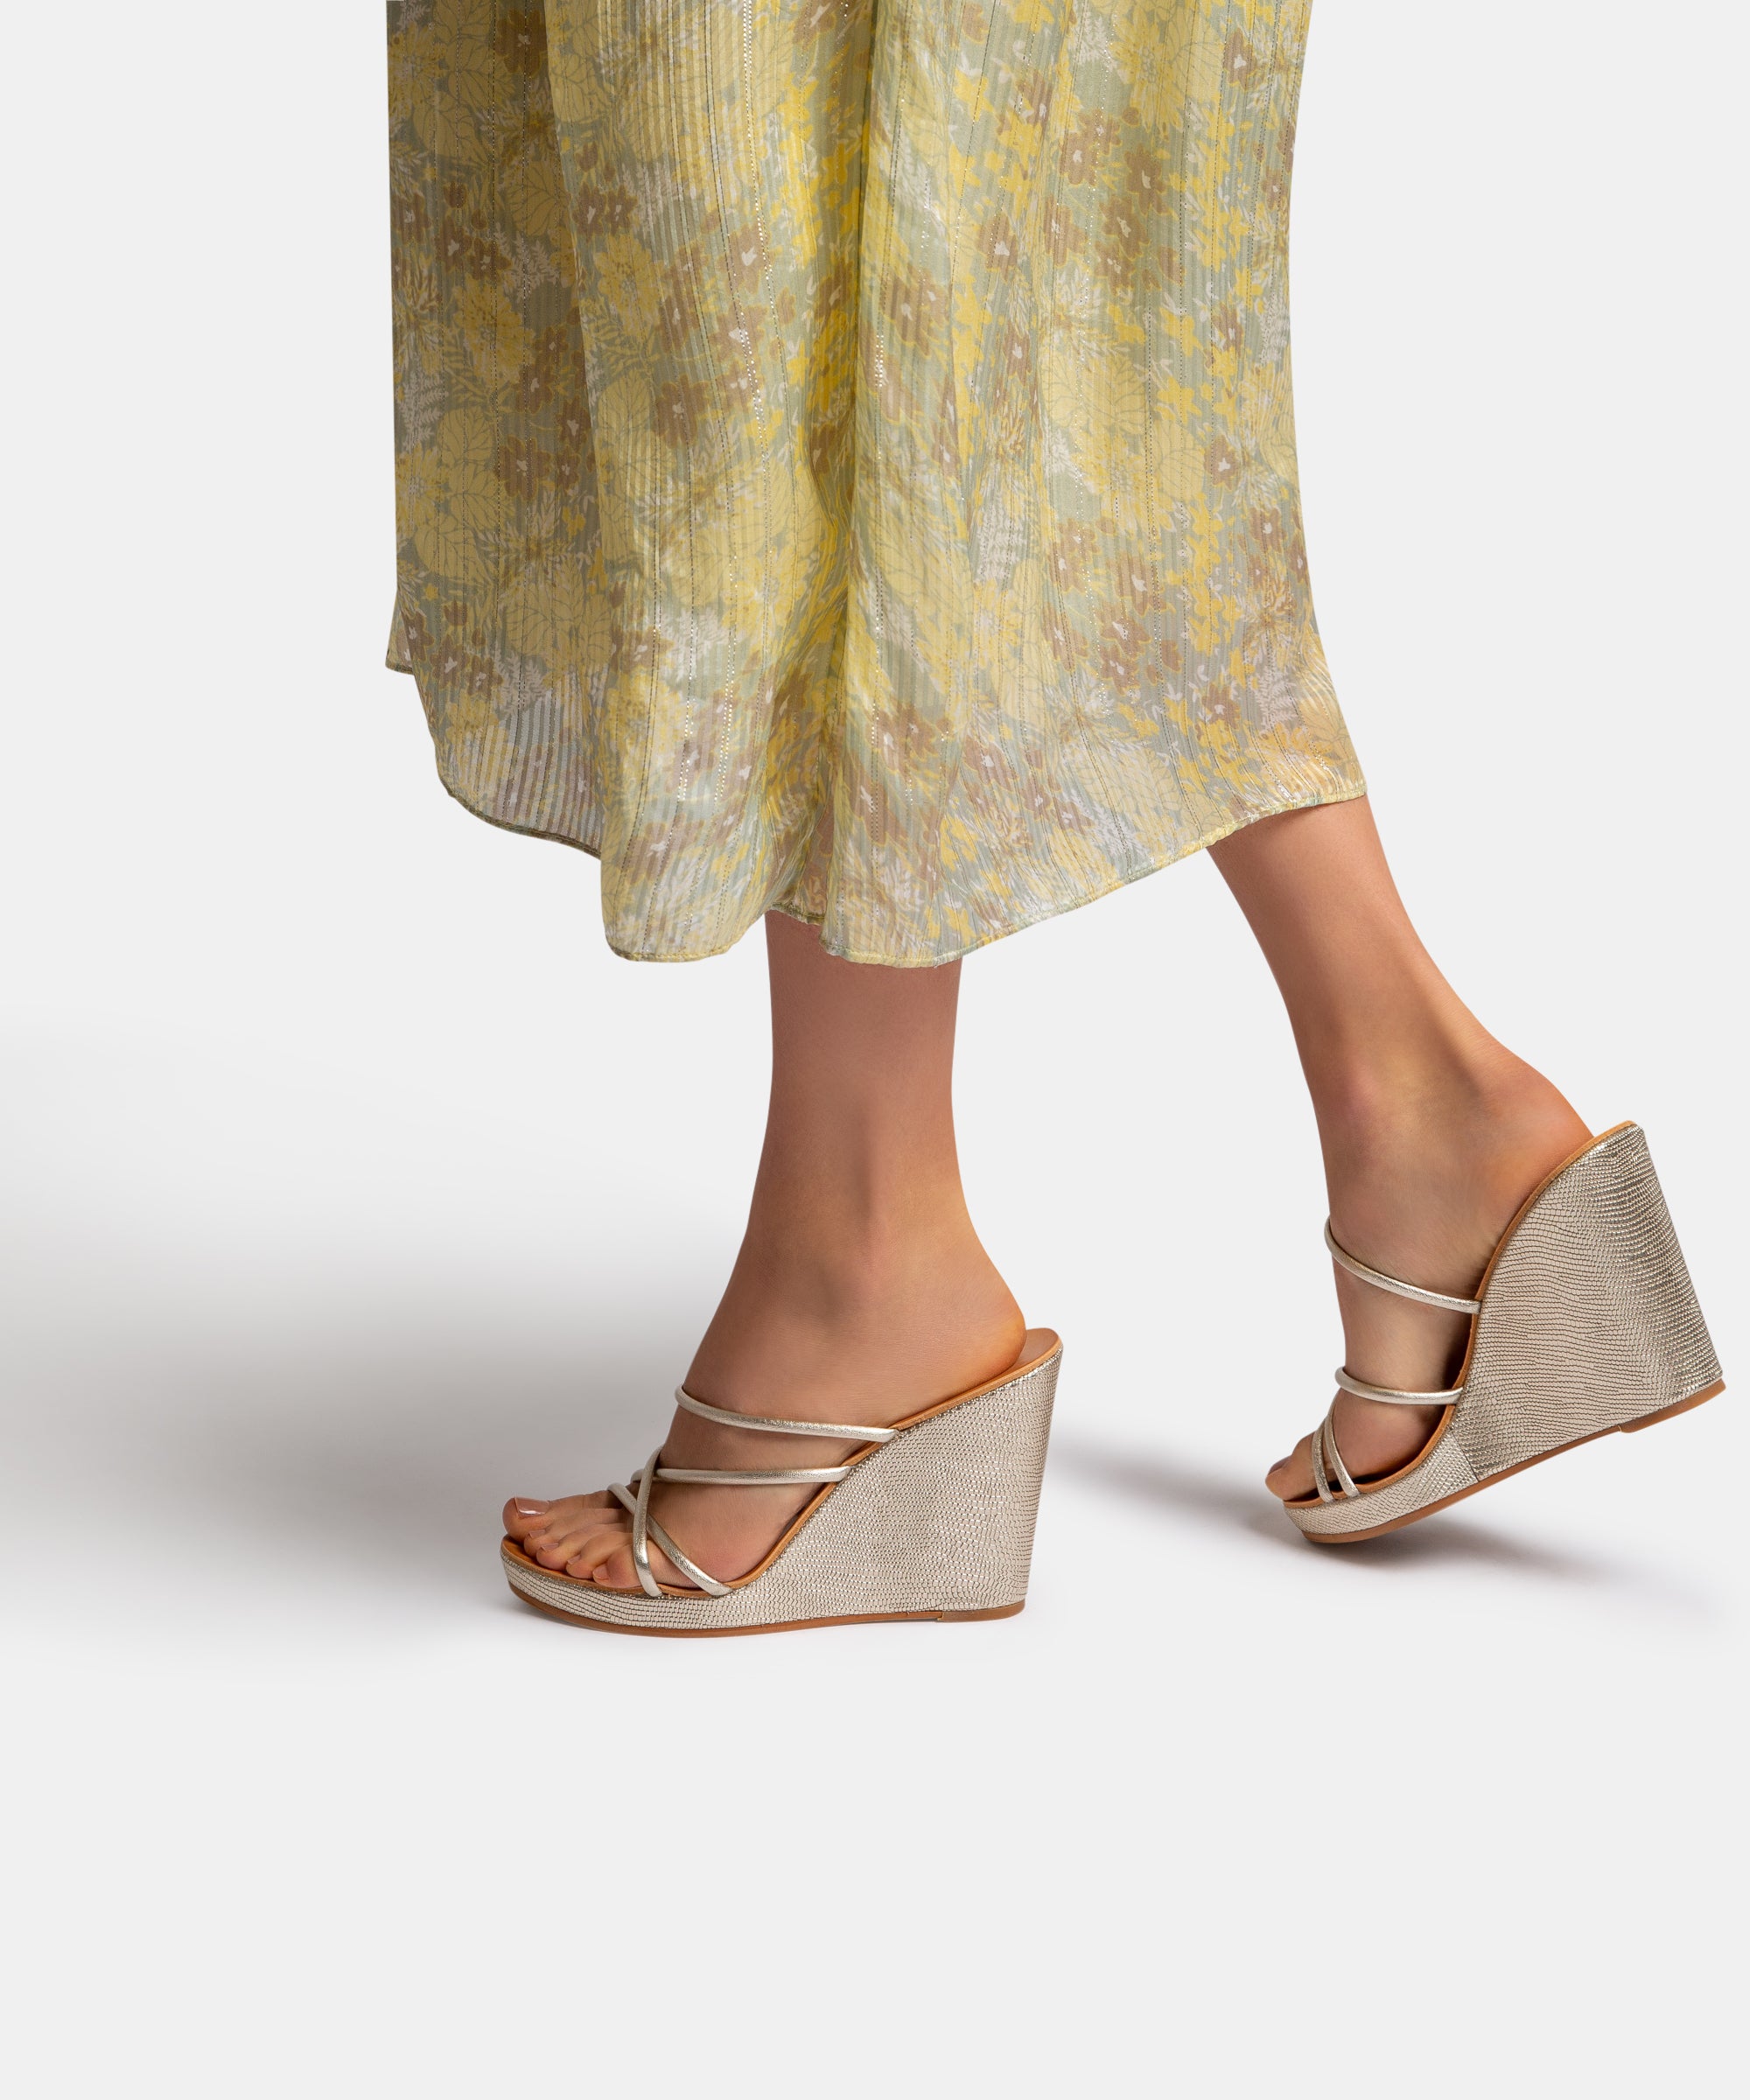 NAYA WEDGES IN LIGHT GOLD LEATHER 